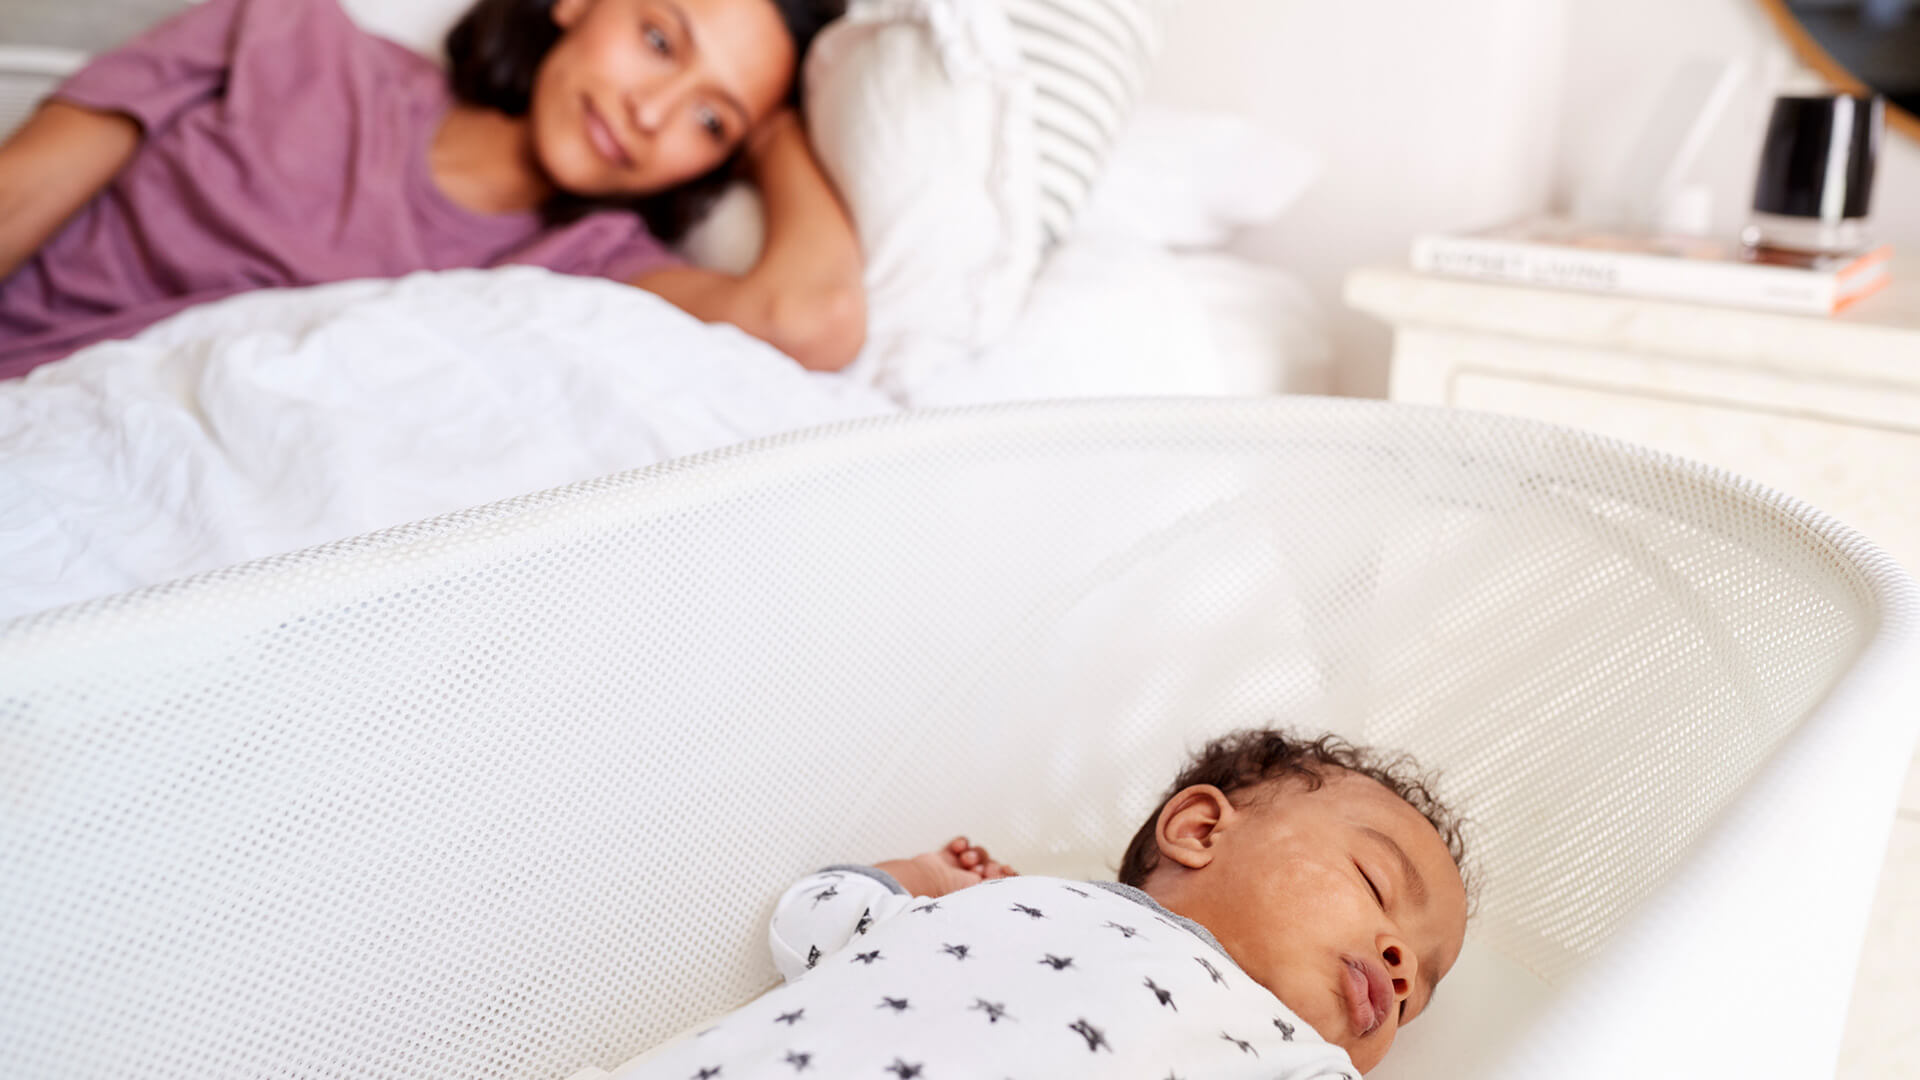 Wondering when your infant will sleep through the night? It’s a common question new parents have. 